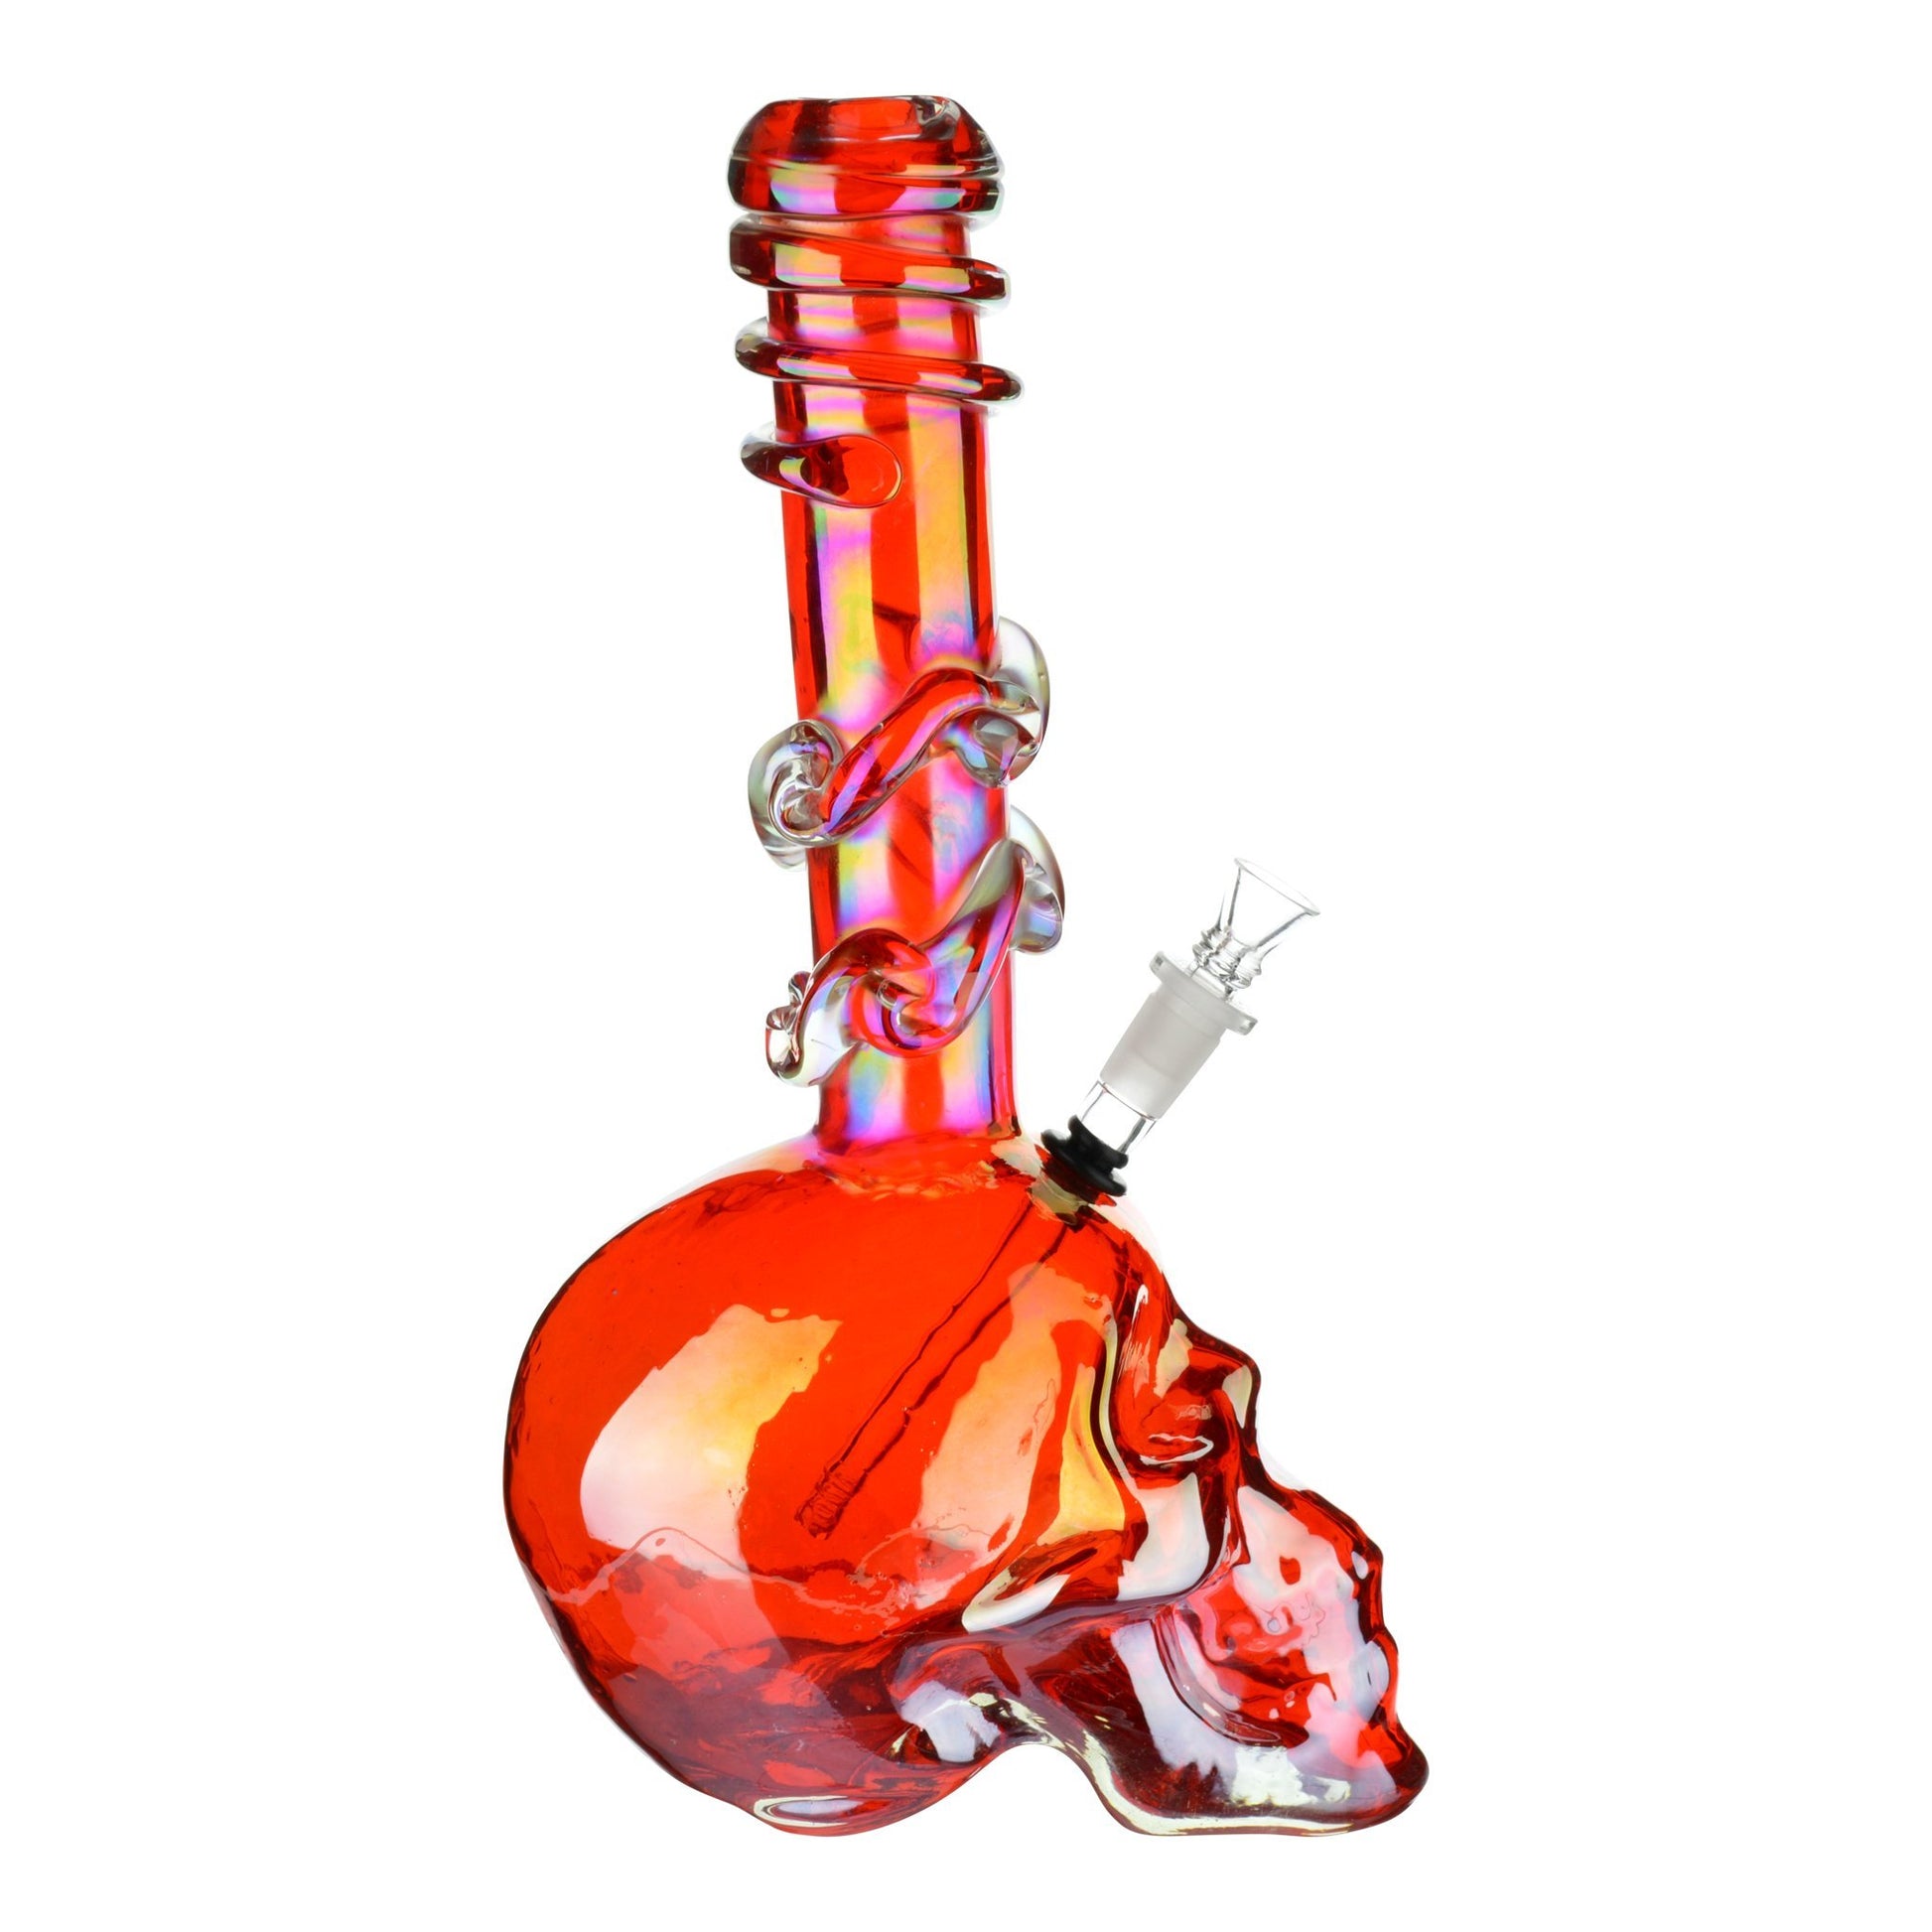 Full front shot of 14-inch iridescent red glass bong spiral mouthpiece skull shaped chamber skull facing right